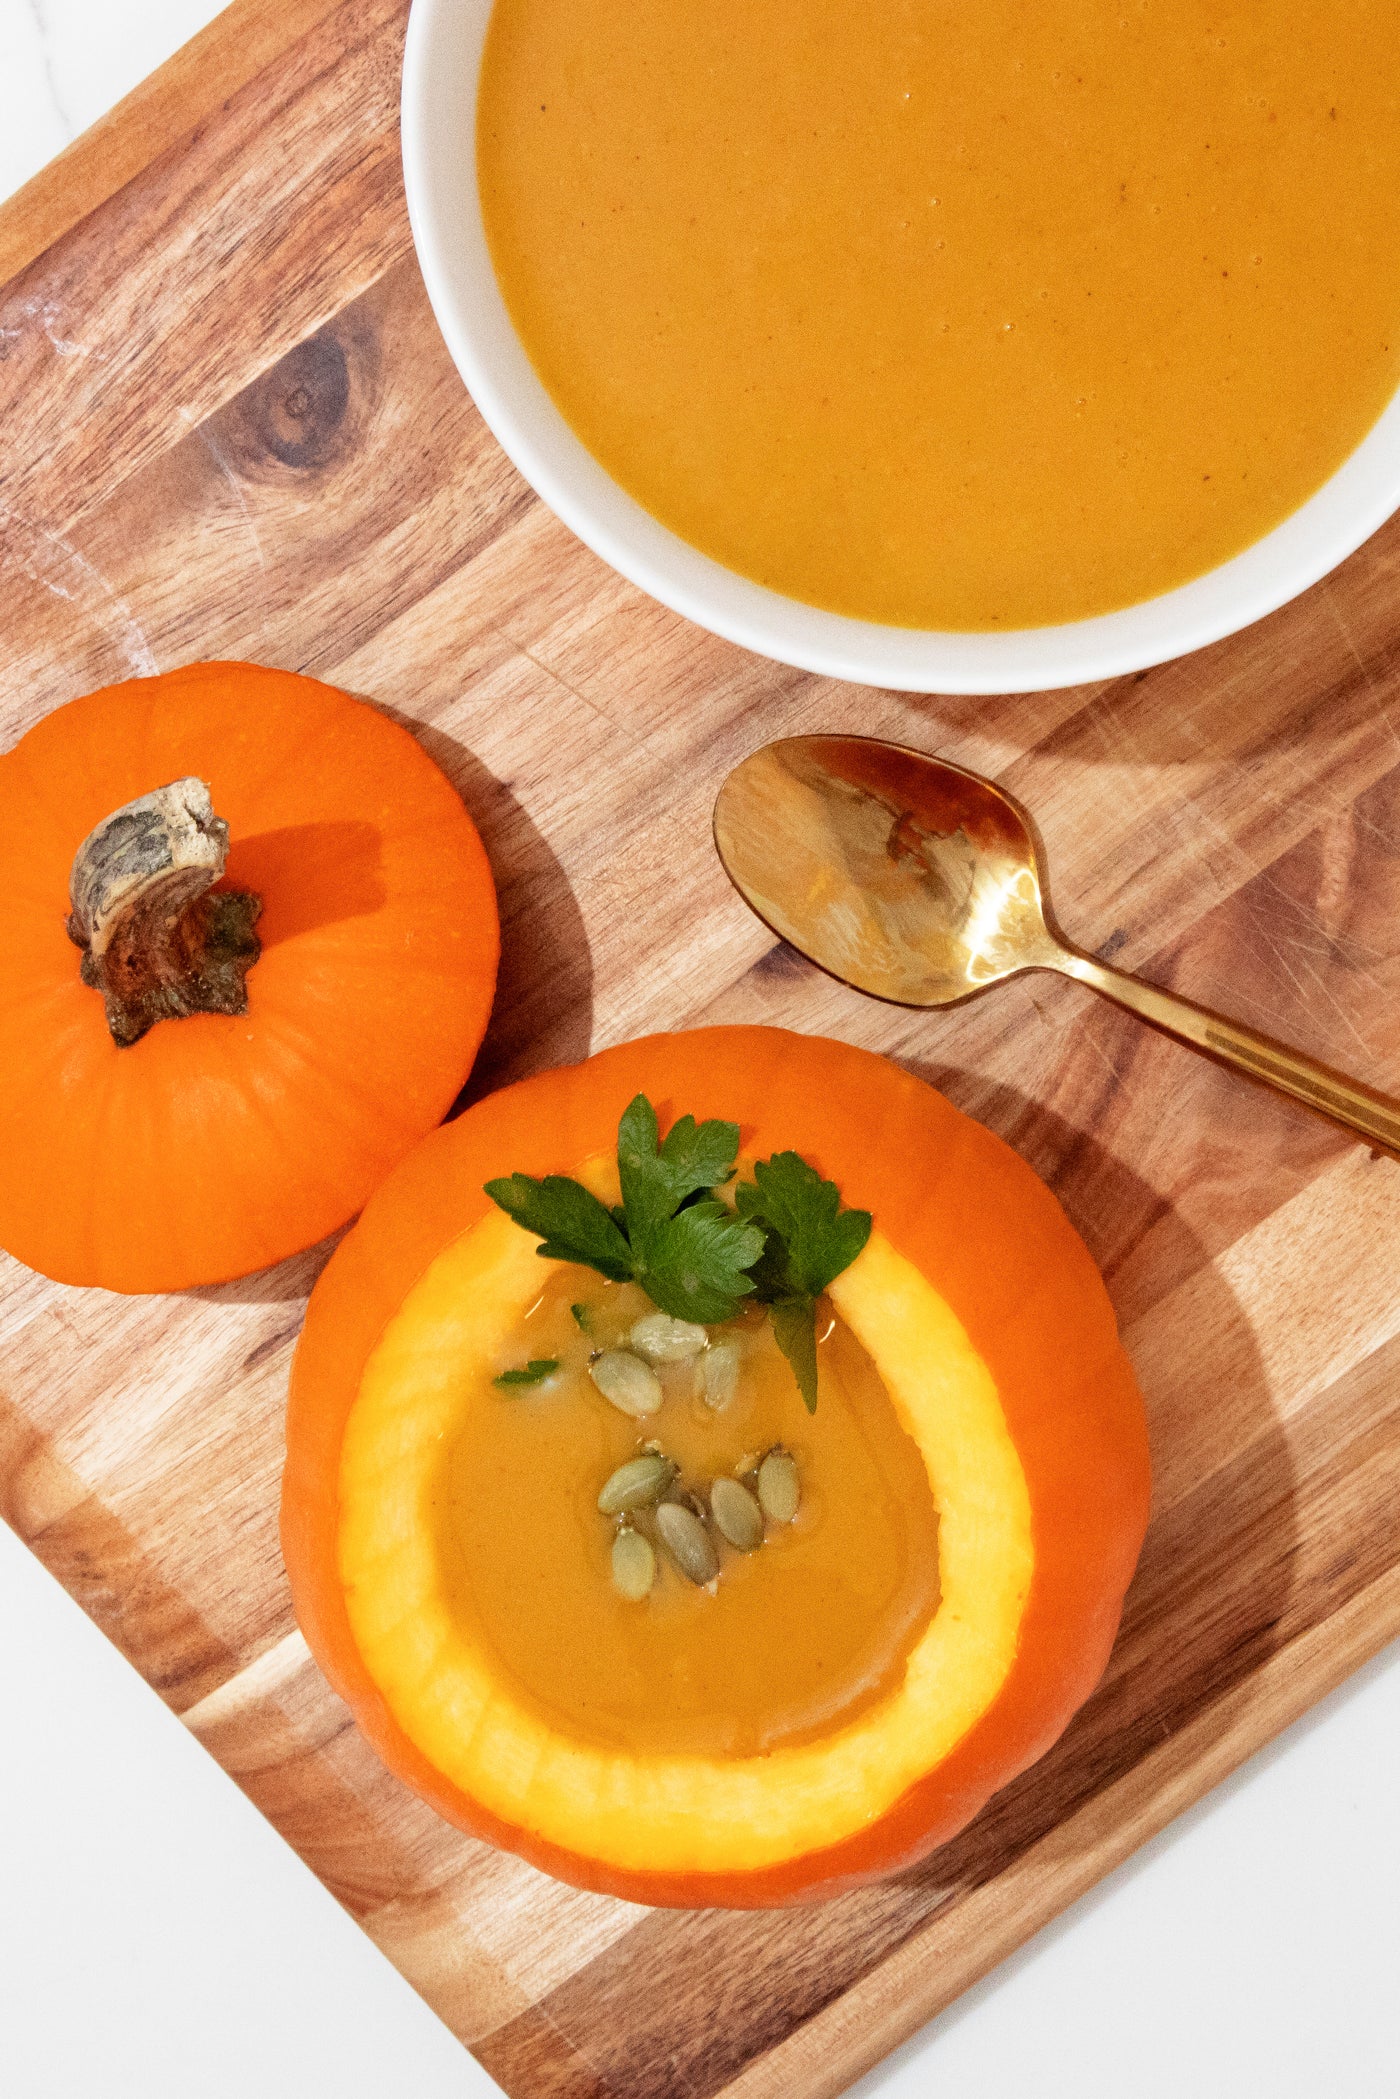 This Simple Pumpkin Soup Recipe Will Warm You Up All Winter Long ...